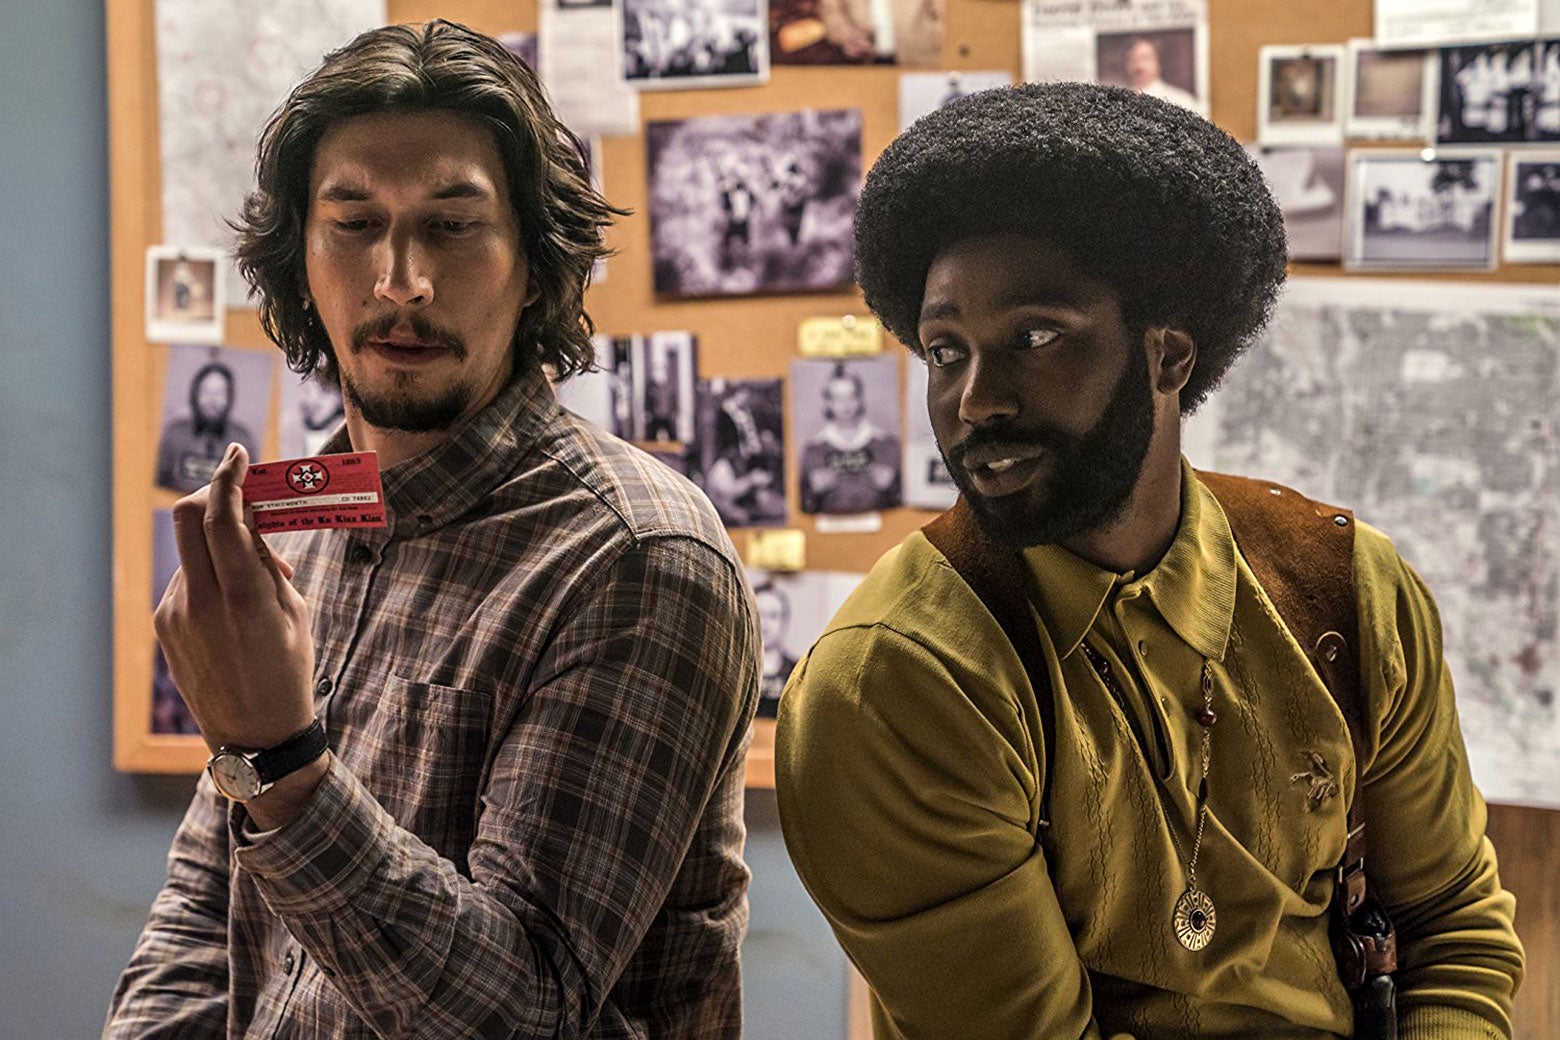 In a scene from BlacKkKlansman, Detective Flip Zimmerman (Adam Driver) holds a Ku Klux Klan membership card while Detective Ron Stallworth looks on.